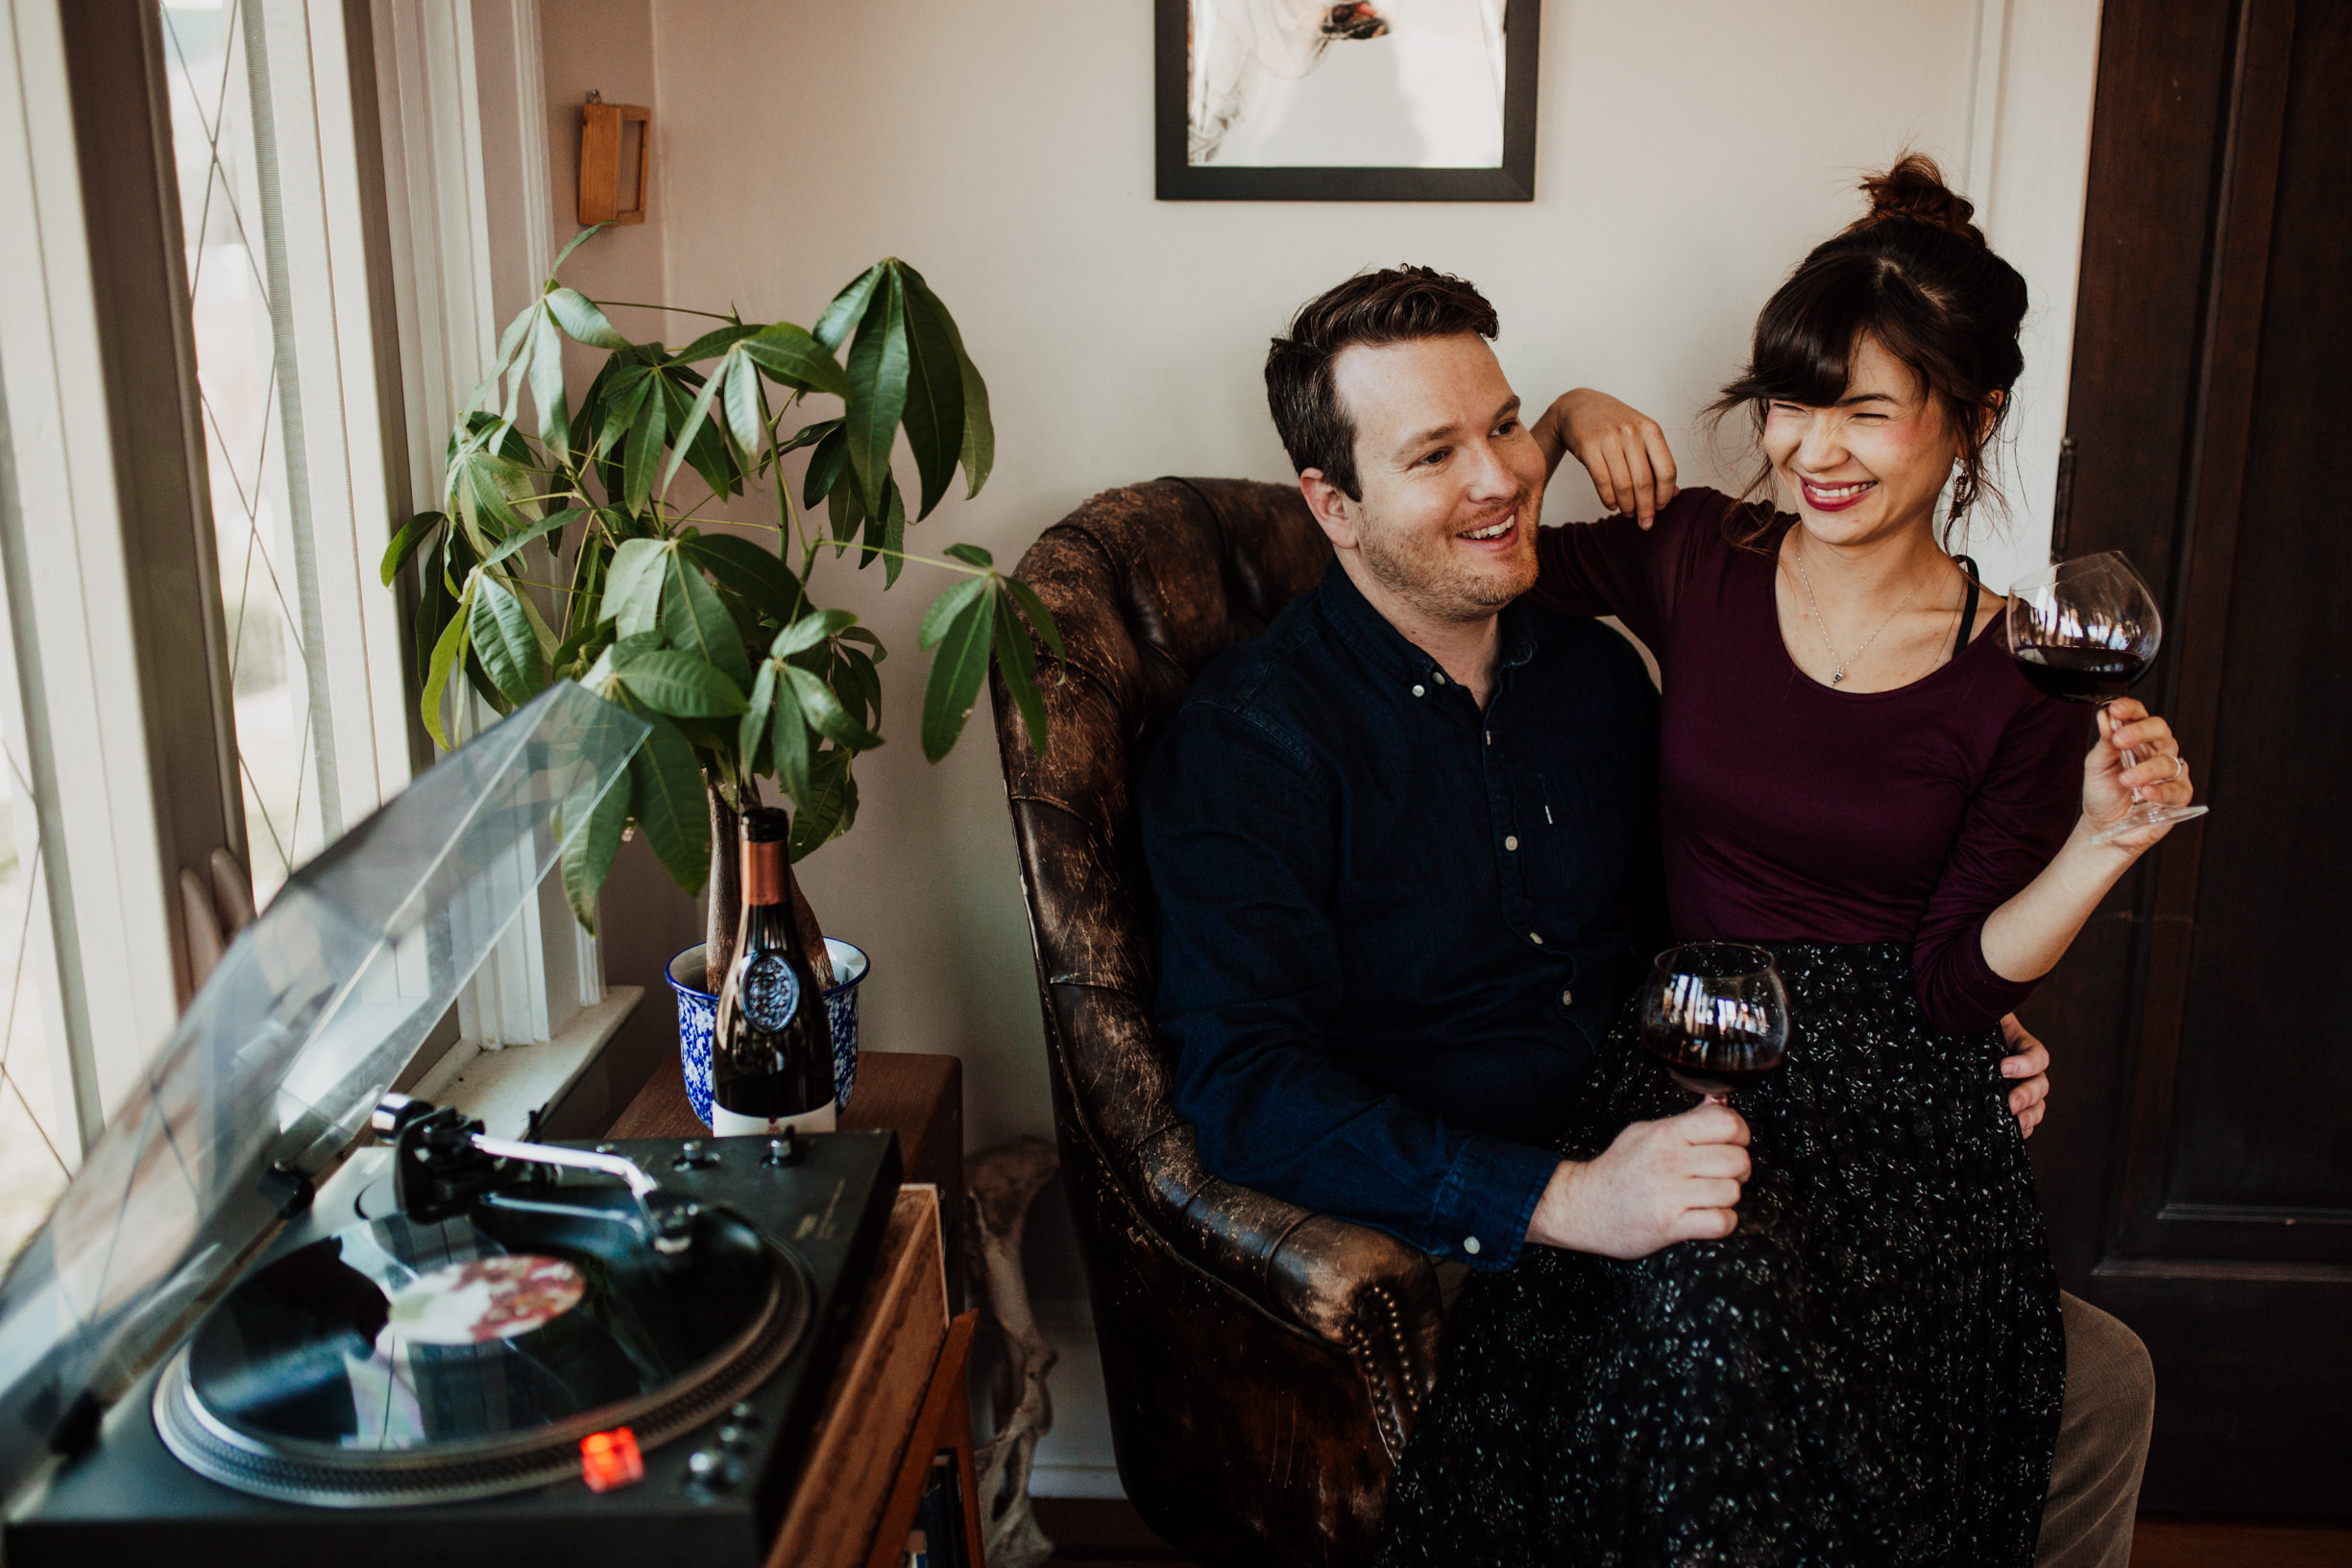 louisville-engagement-photographer-record-store-in-home-session-crystal-ludwick-photo (7 of 53).jpg